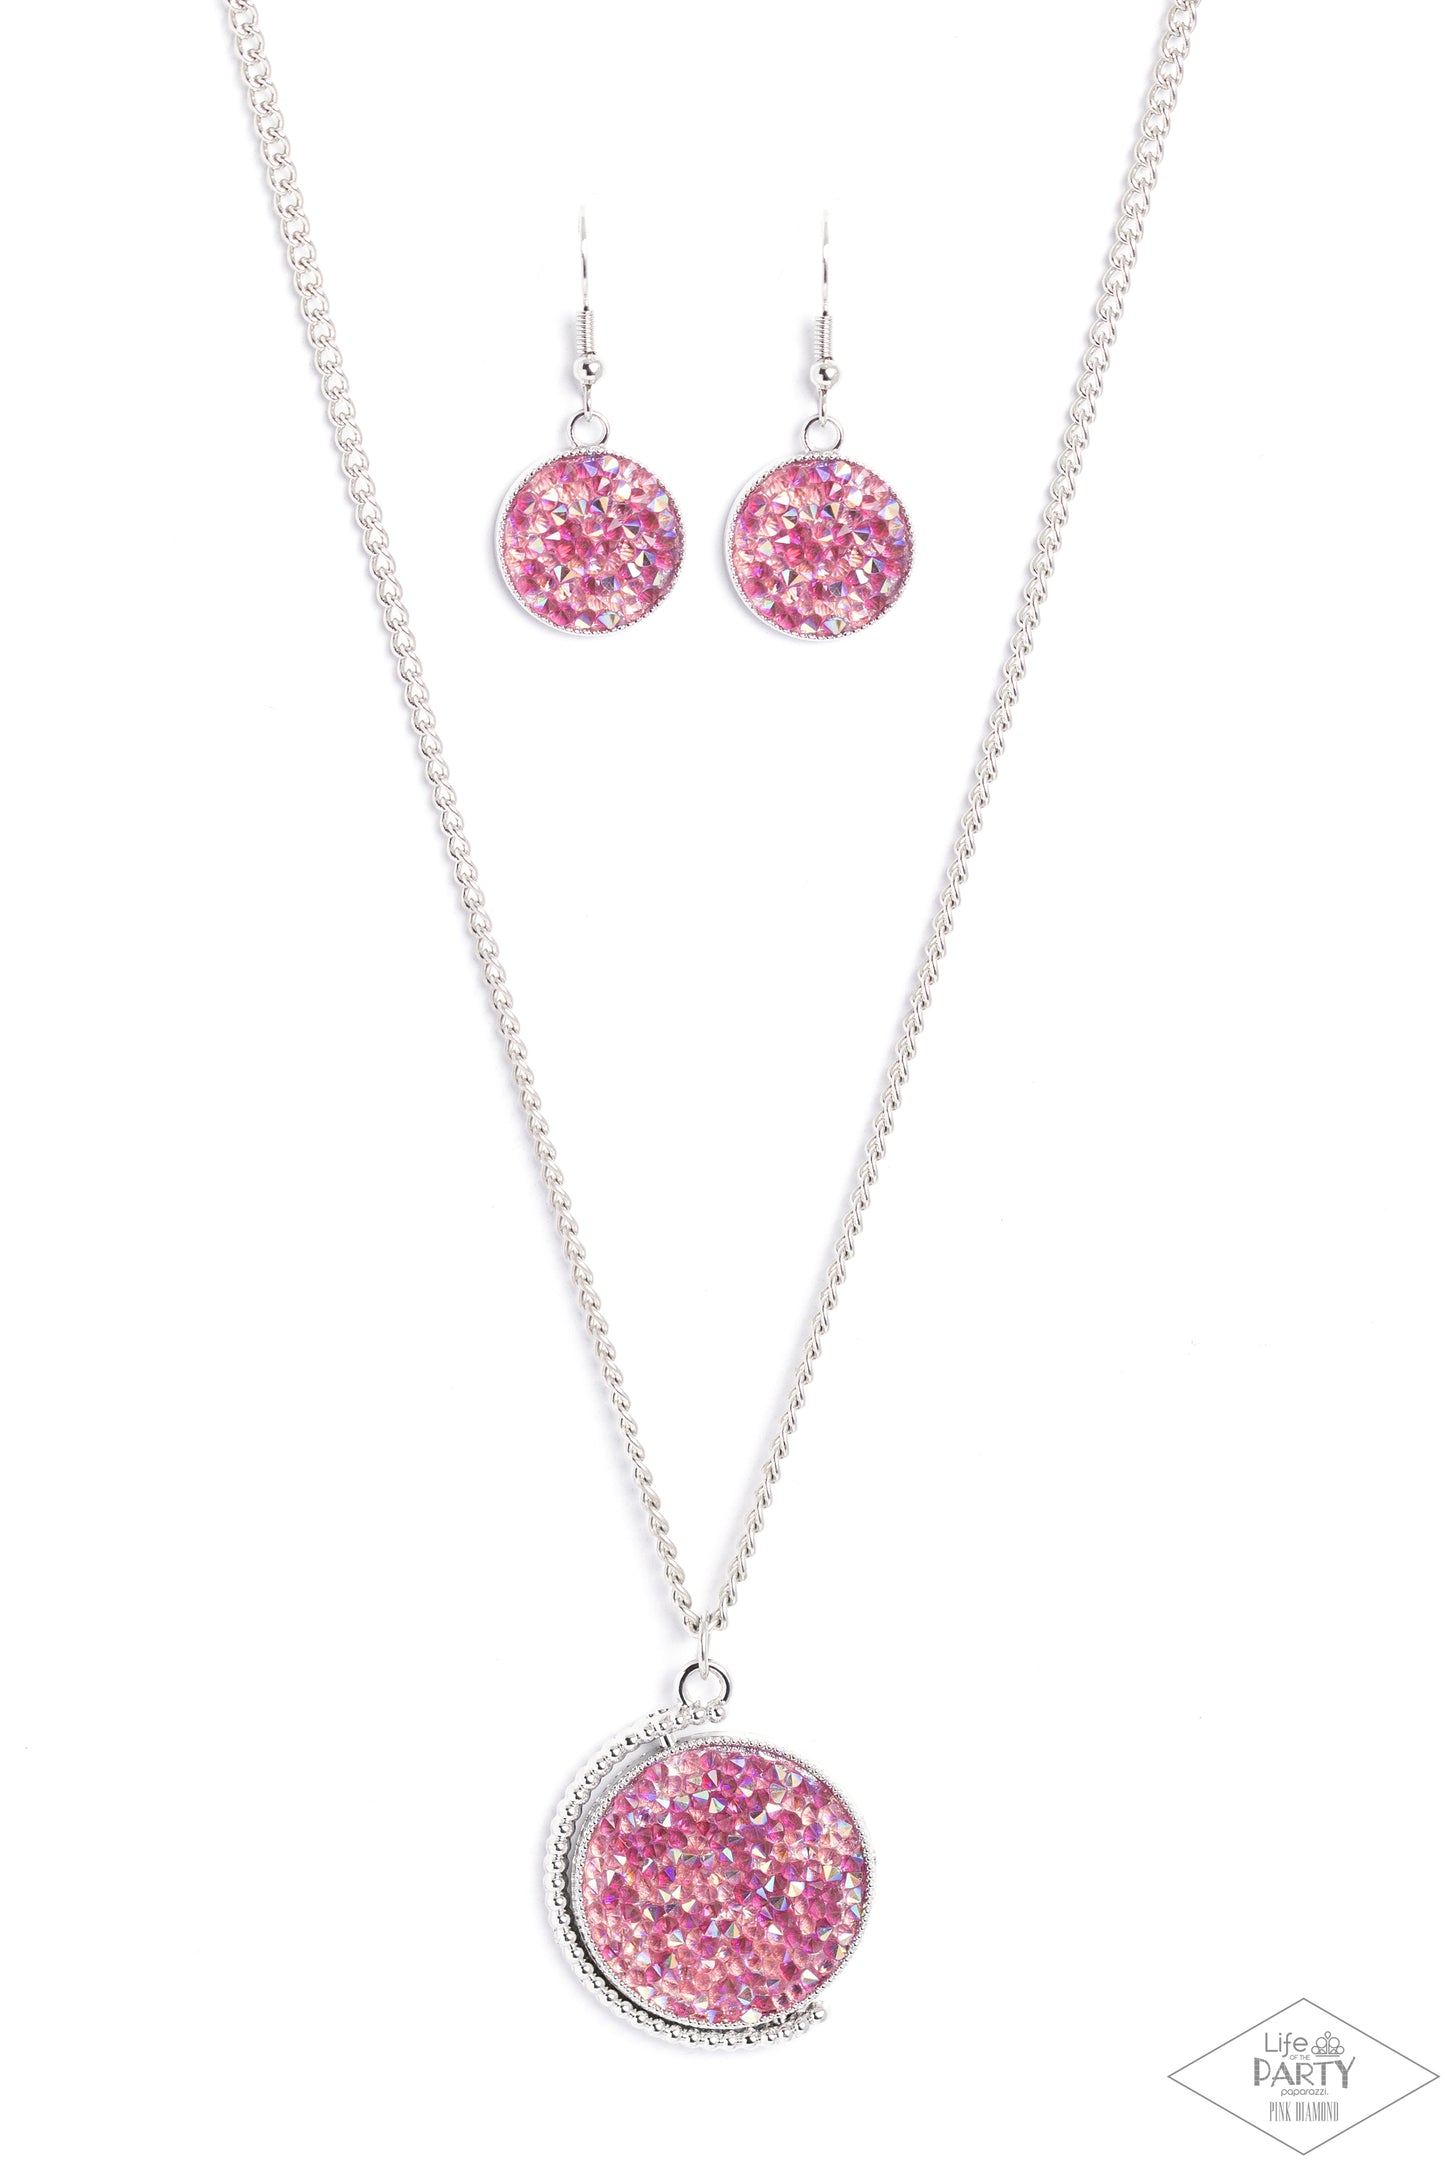 MY MOON AND STARS - MULTI BLUE PINK DRUZY SWIVEL DROOZY GENDER REVEAL NECKLACE SET